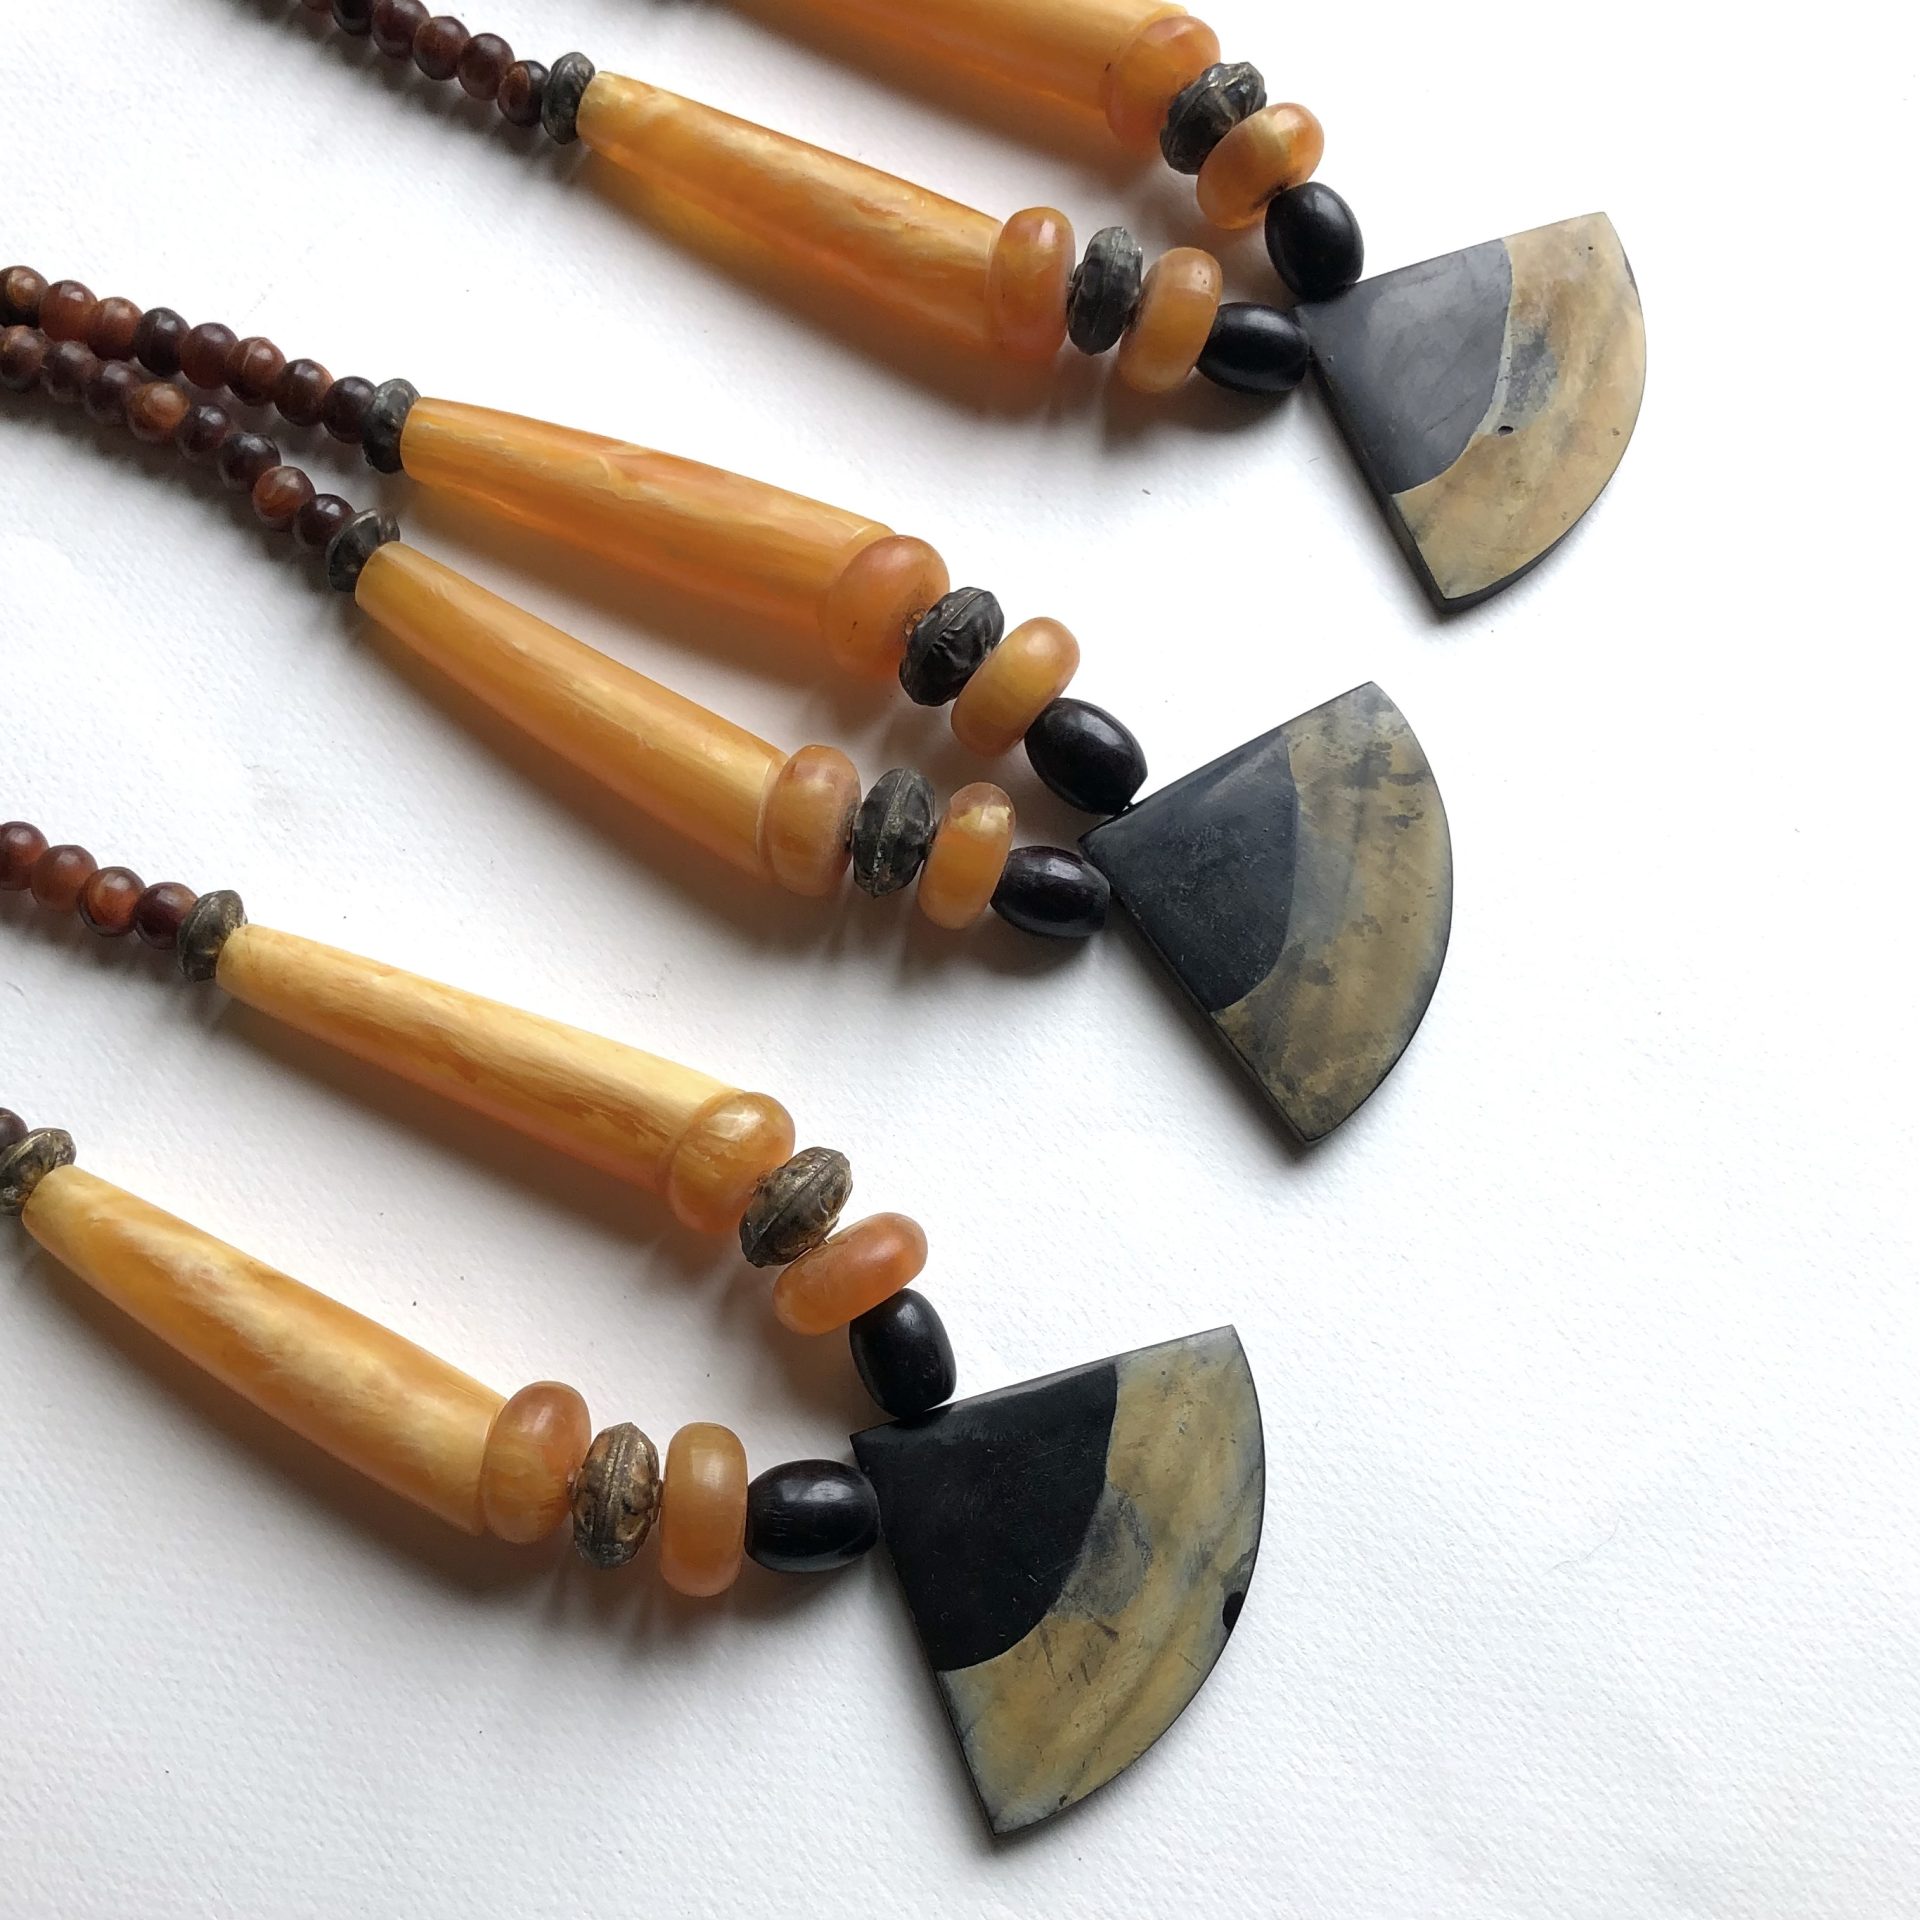 African Beads Necklace